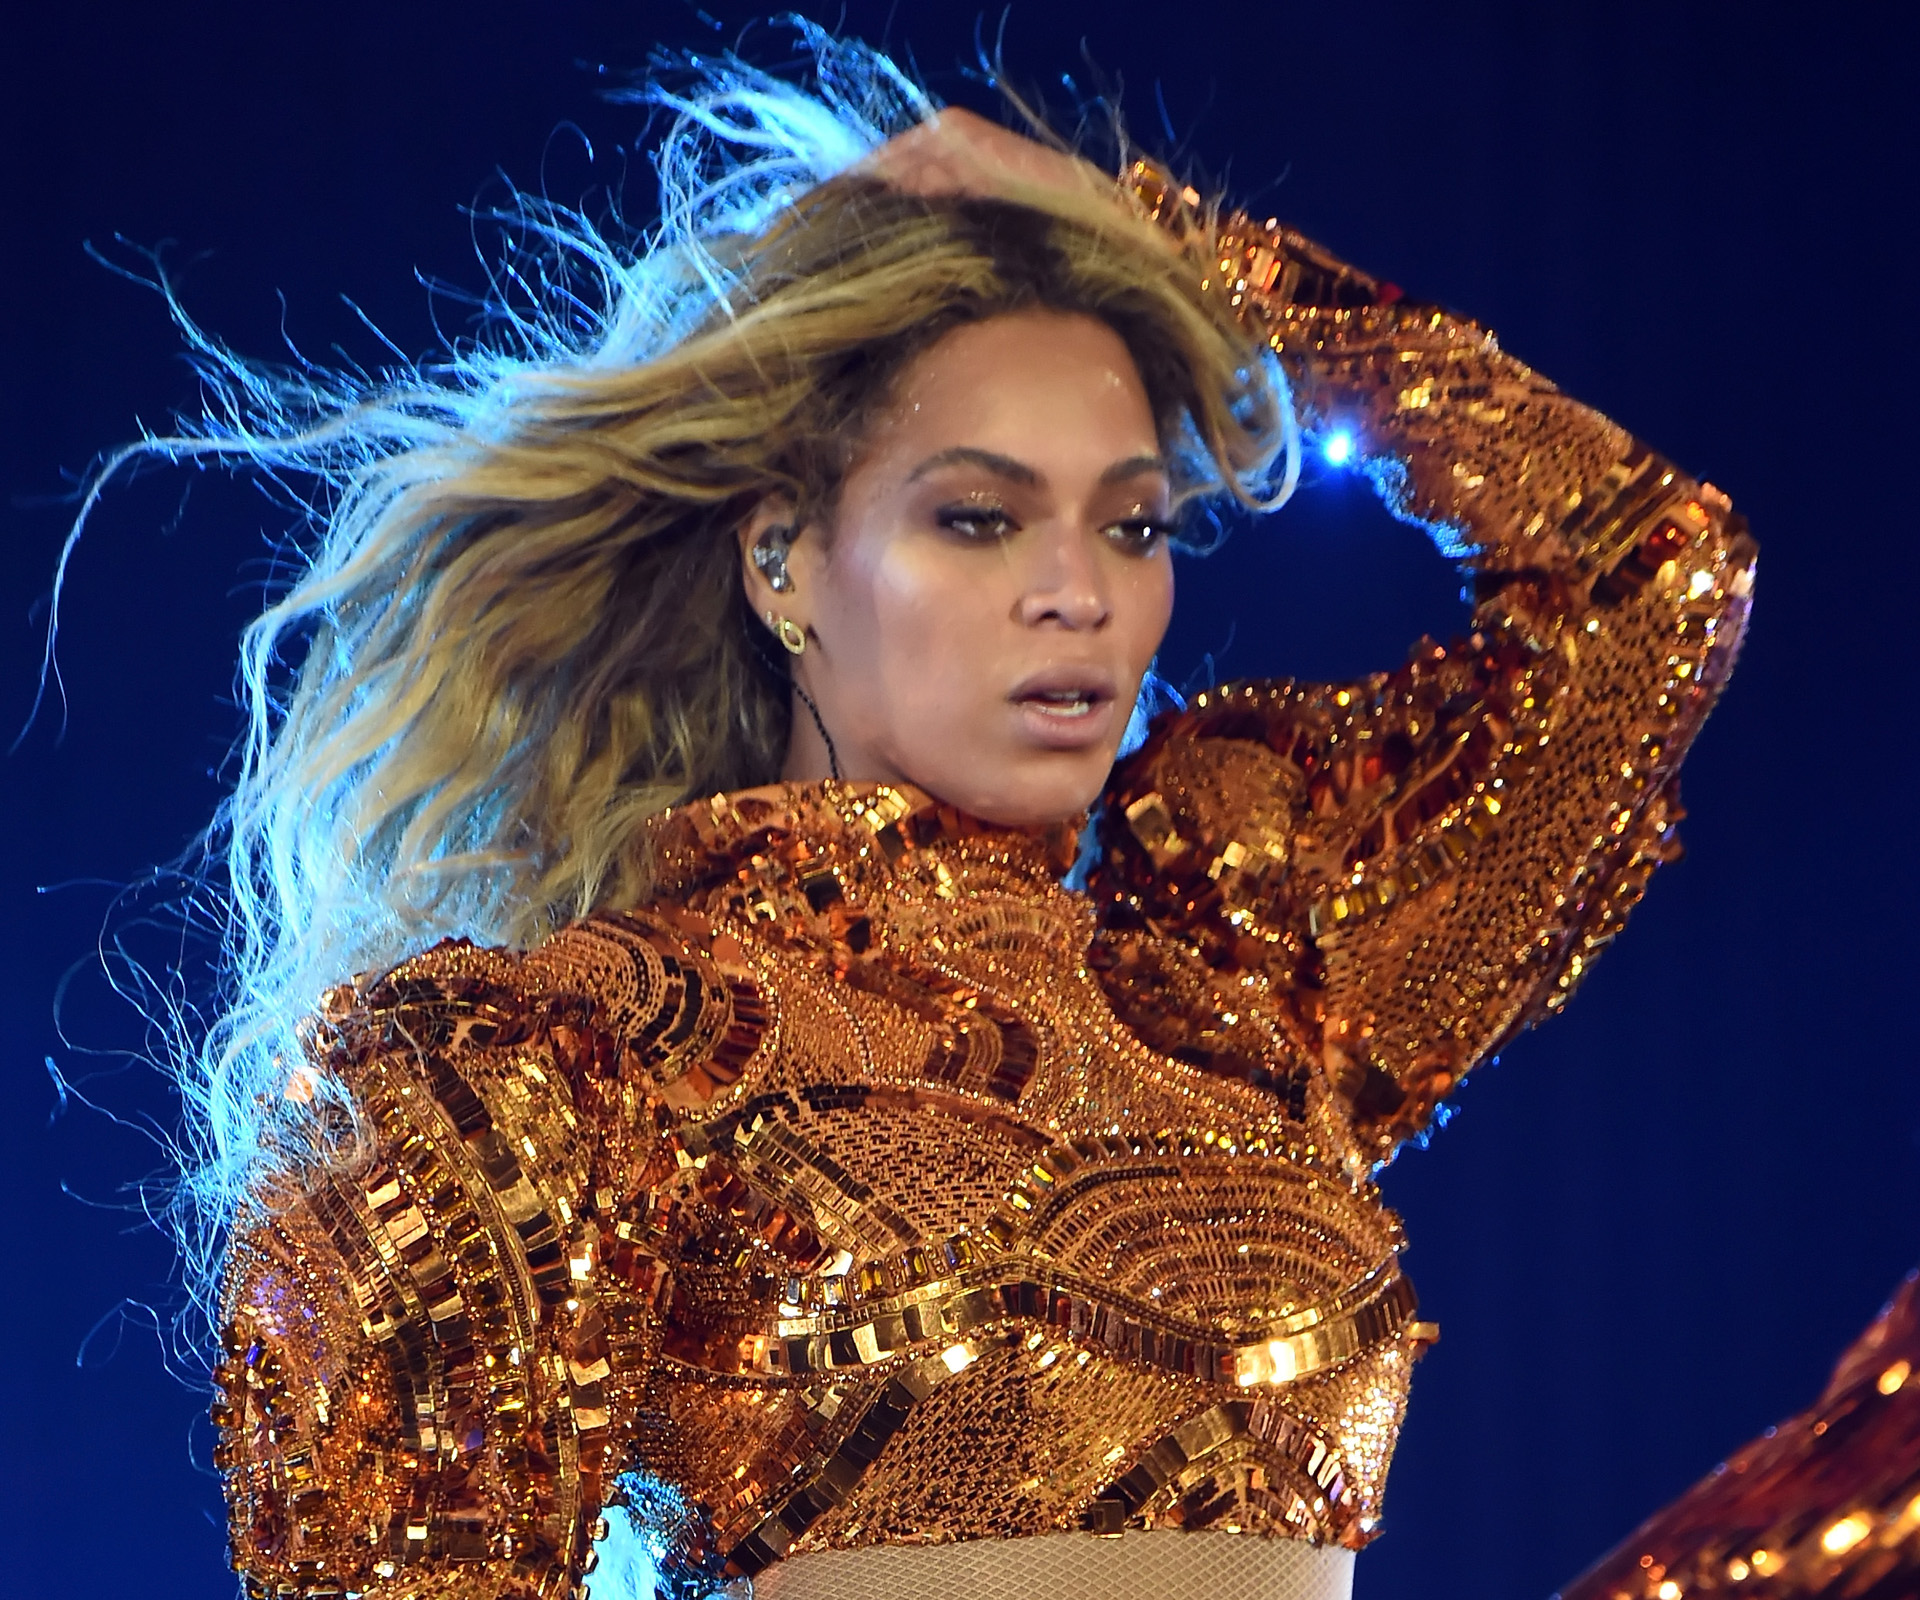 Beyoncé turns 35 today and the party is going to be huge